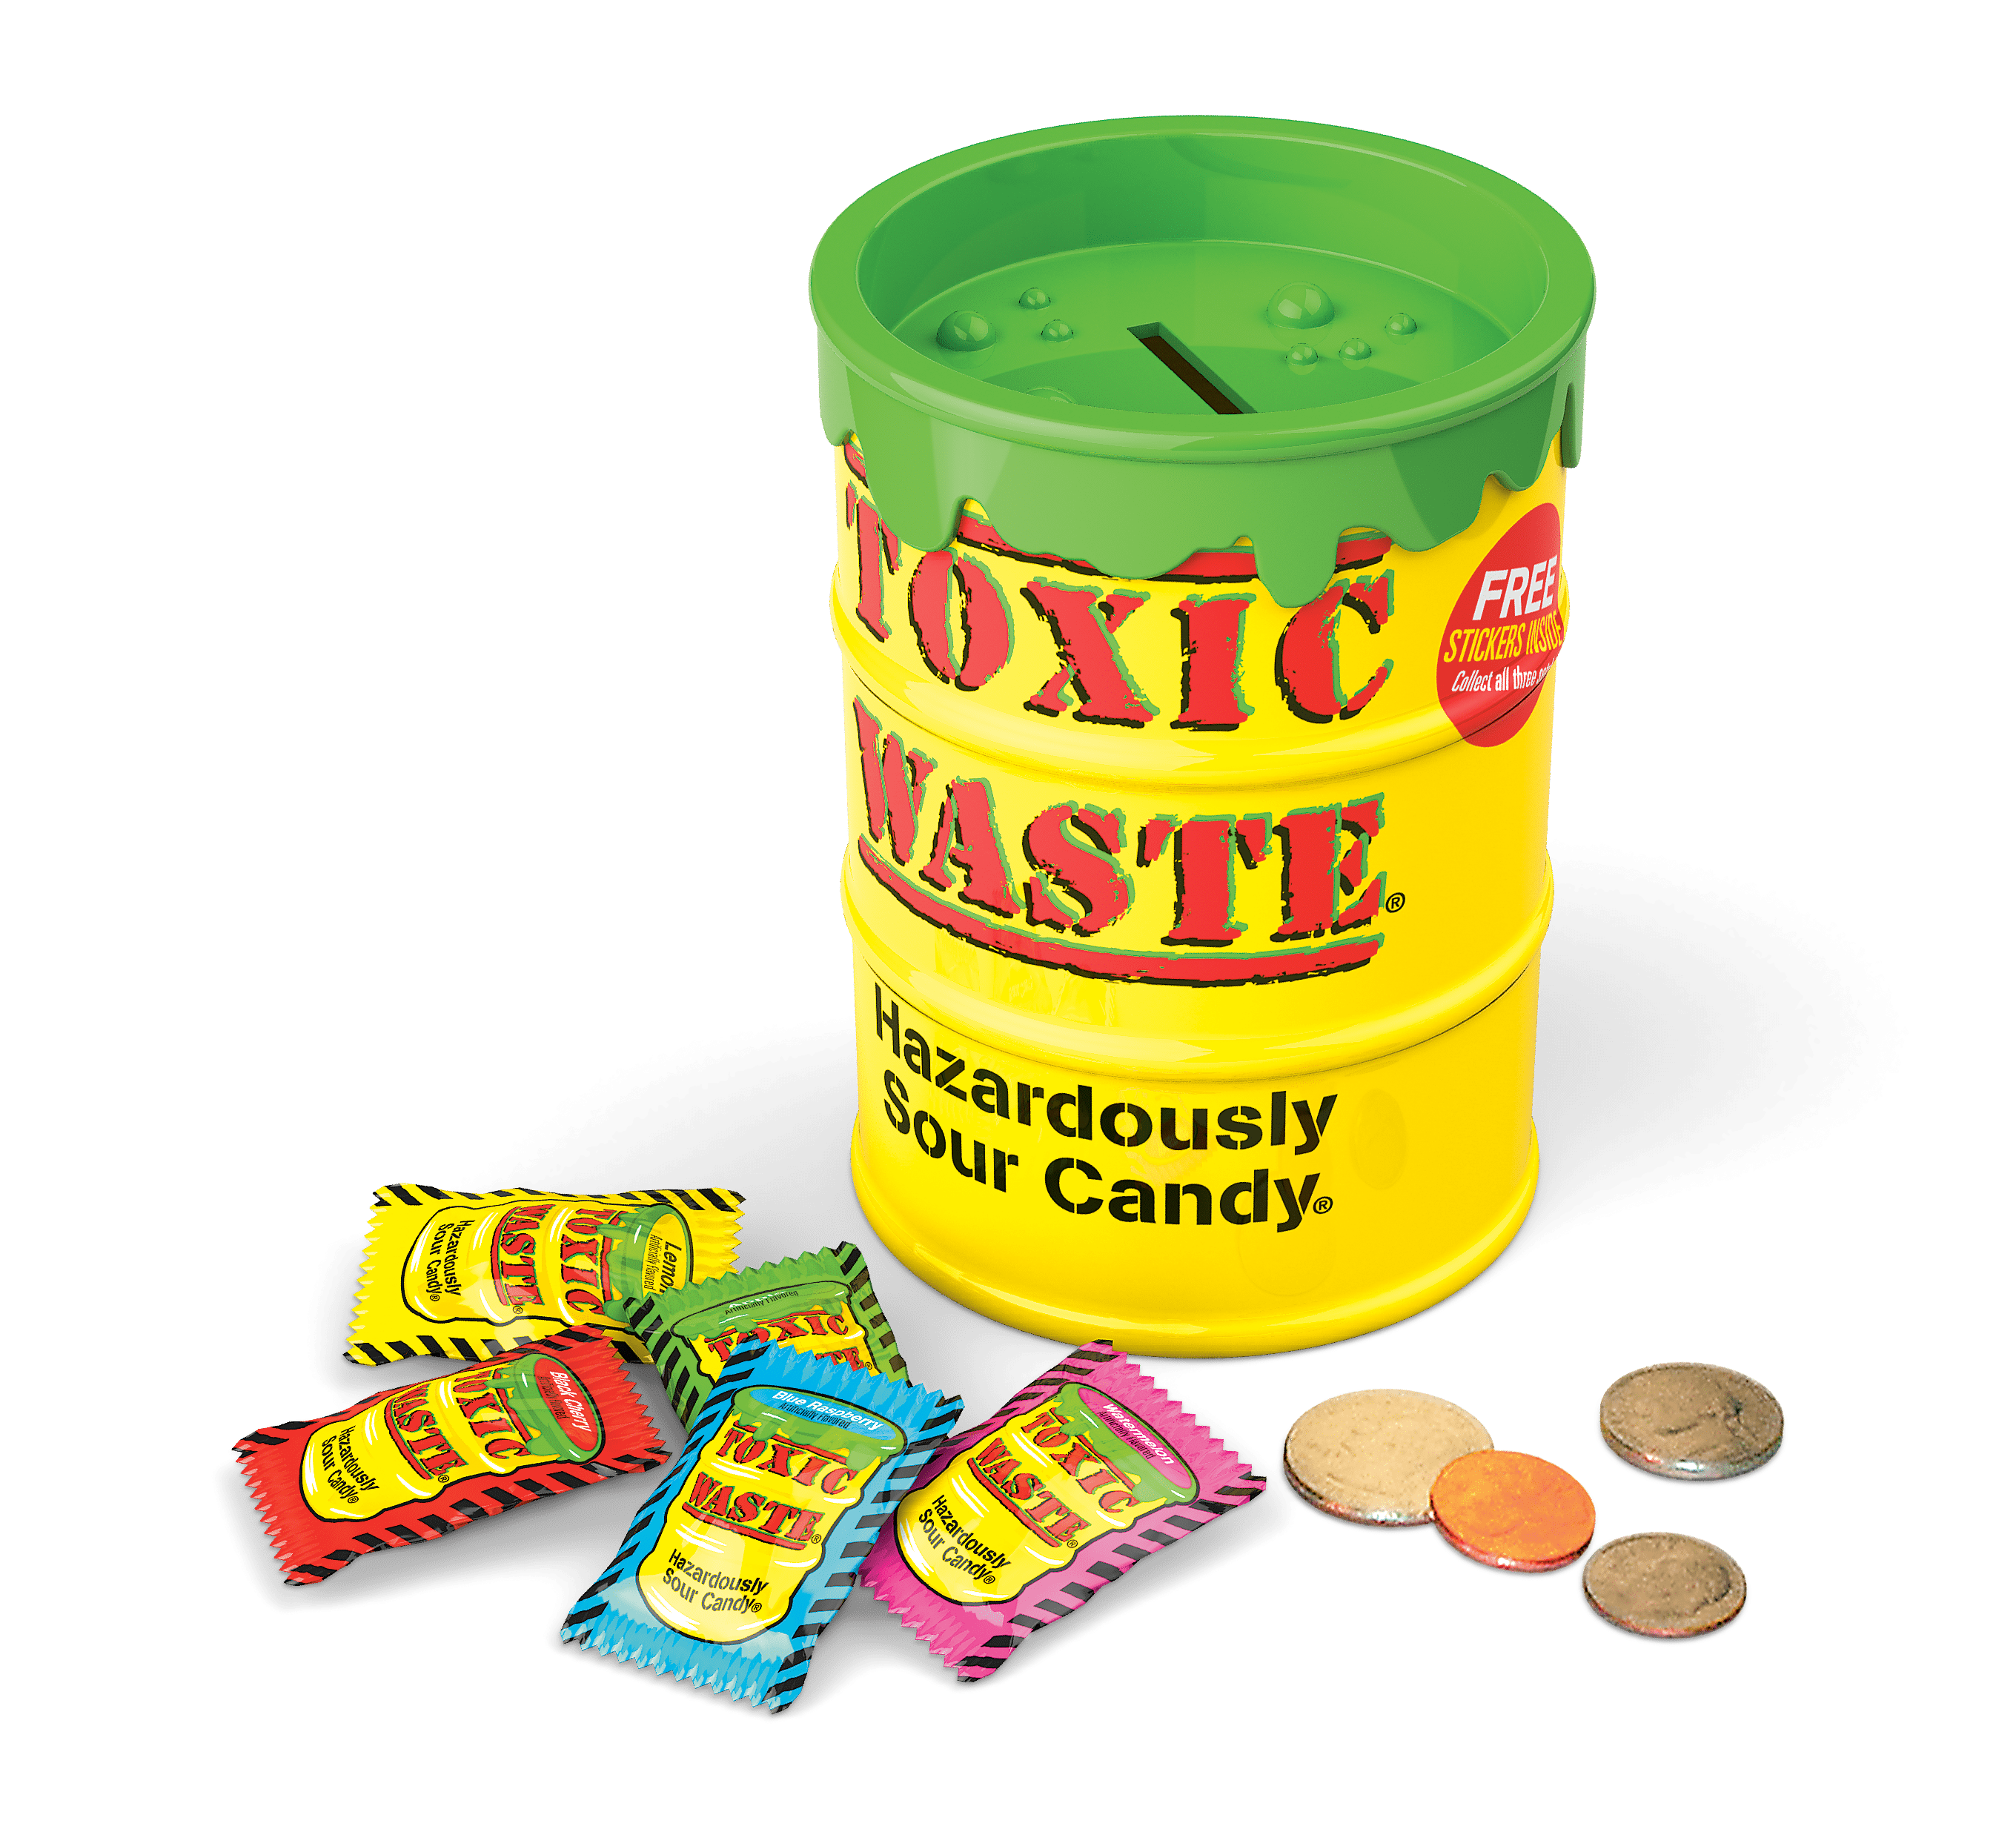 TOXIC WASTE HAZARDOUSLY SOUR CANDY 5-FLAVORS 48g